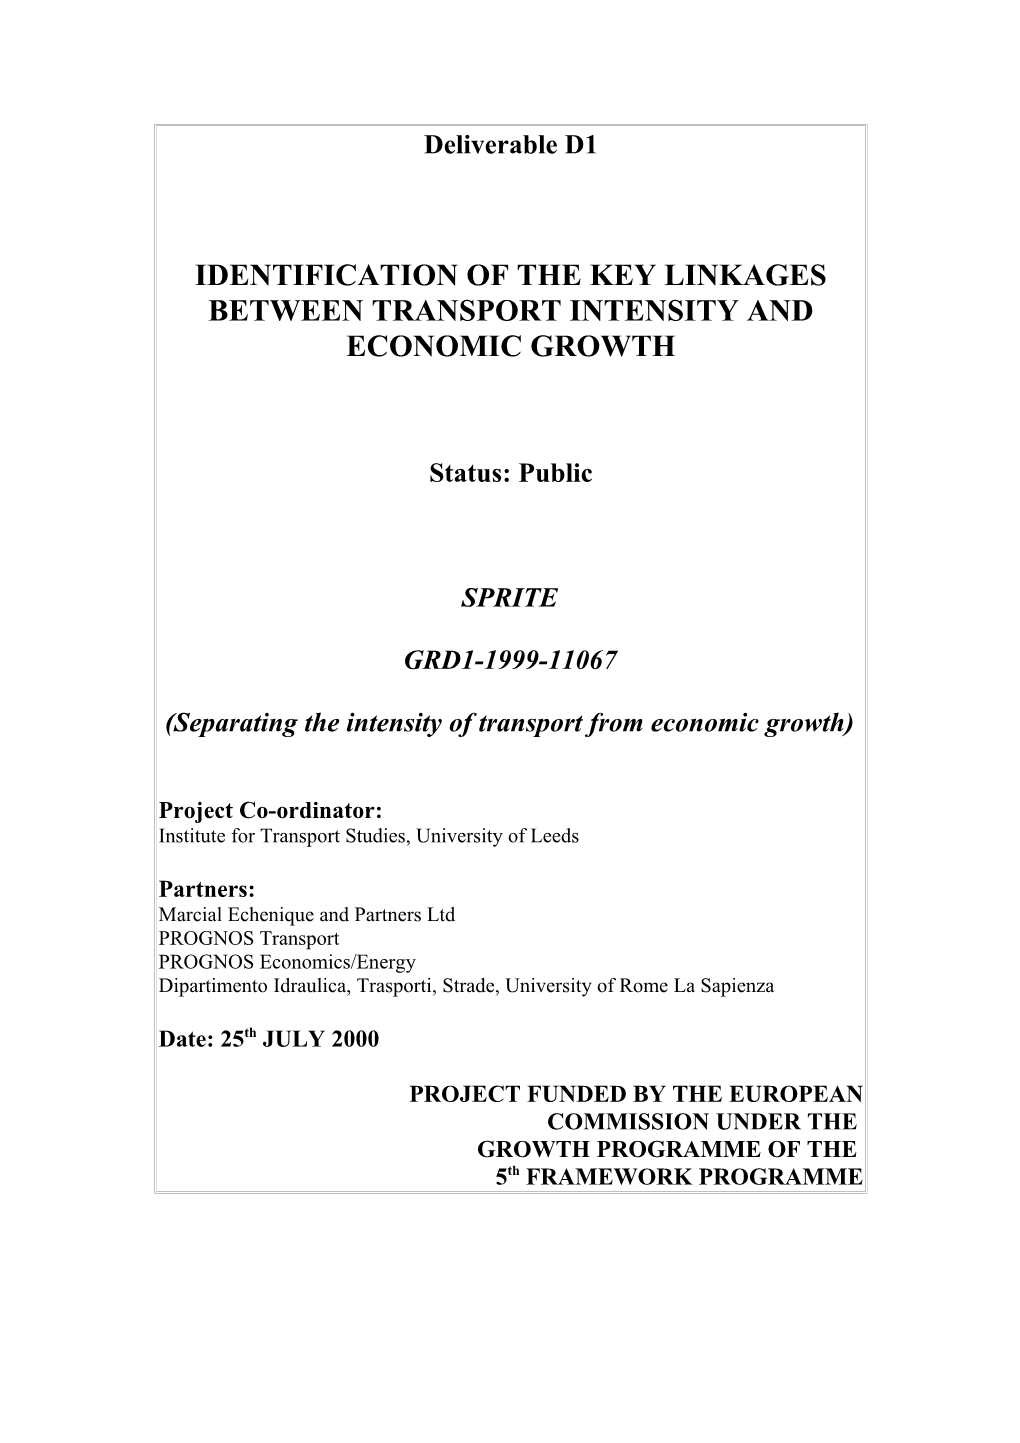 Identification of the Key Linkages Between Transport Intensity and Economic Growth